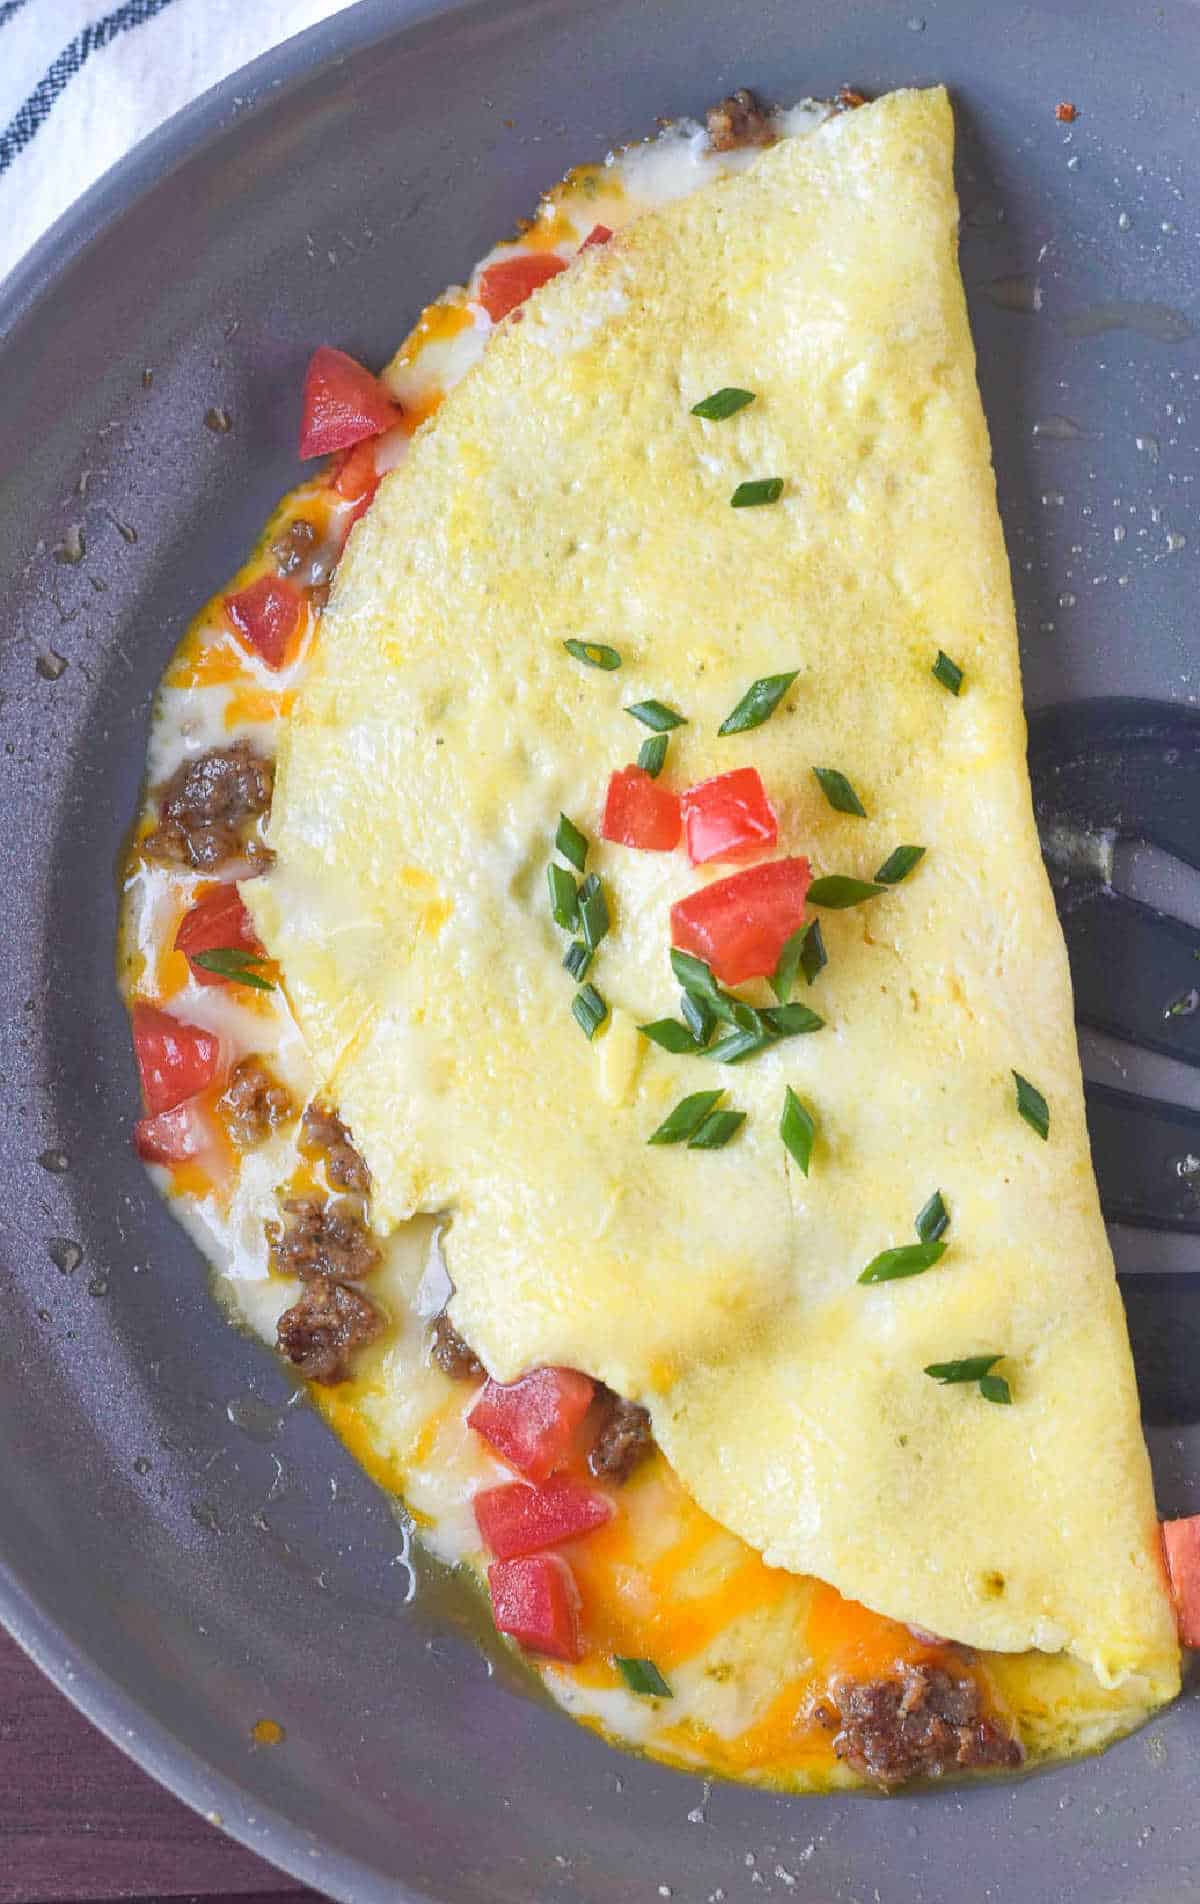 Sausage cheese omelet finished in a skillet.